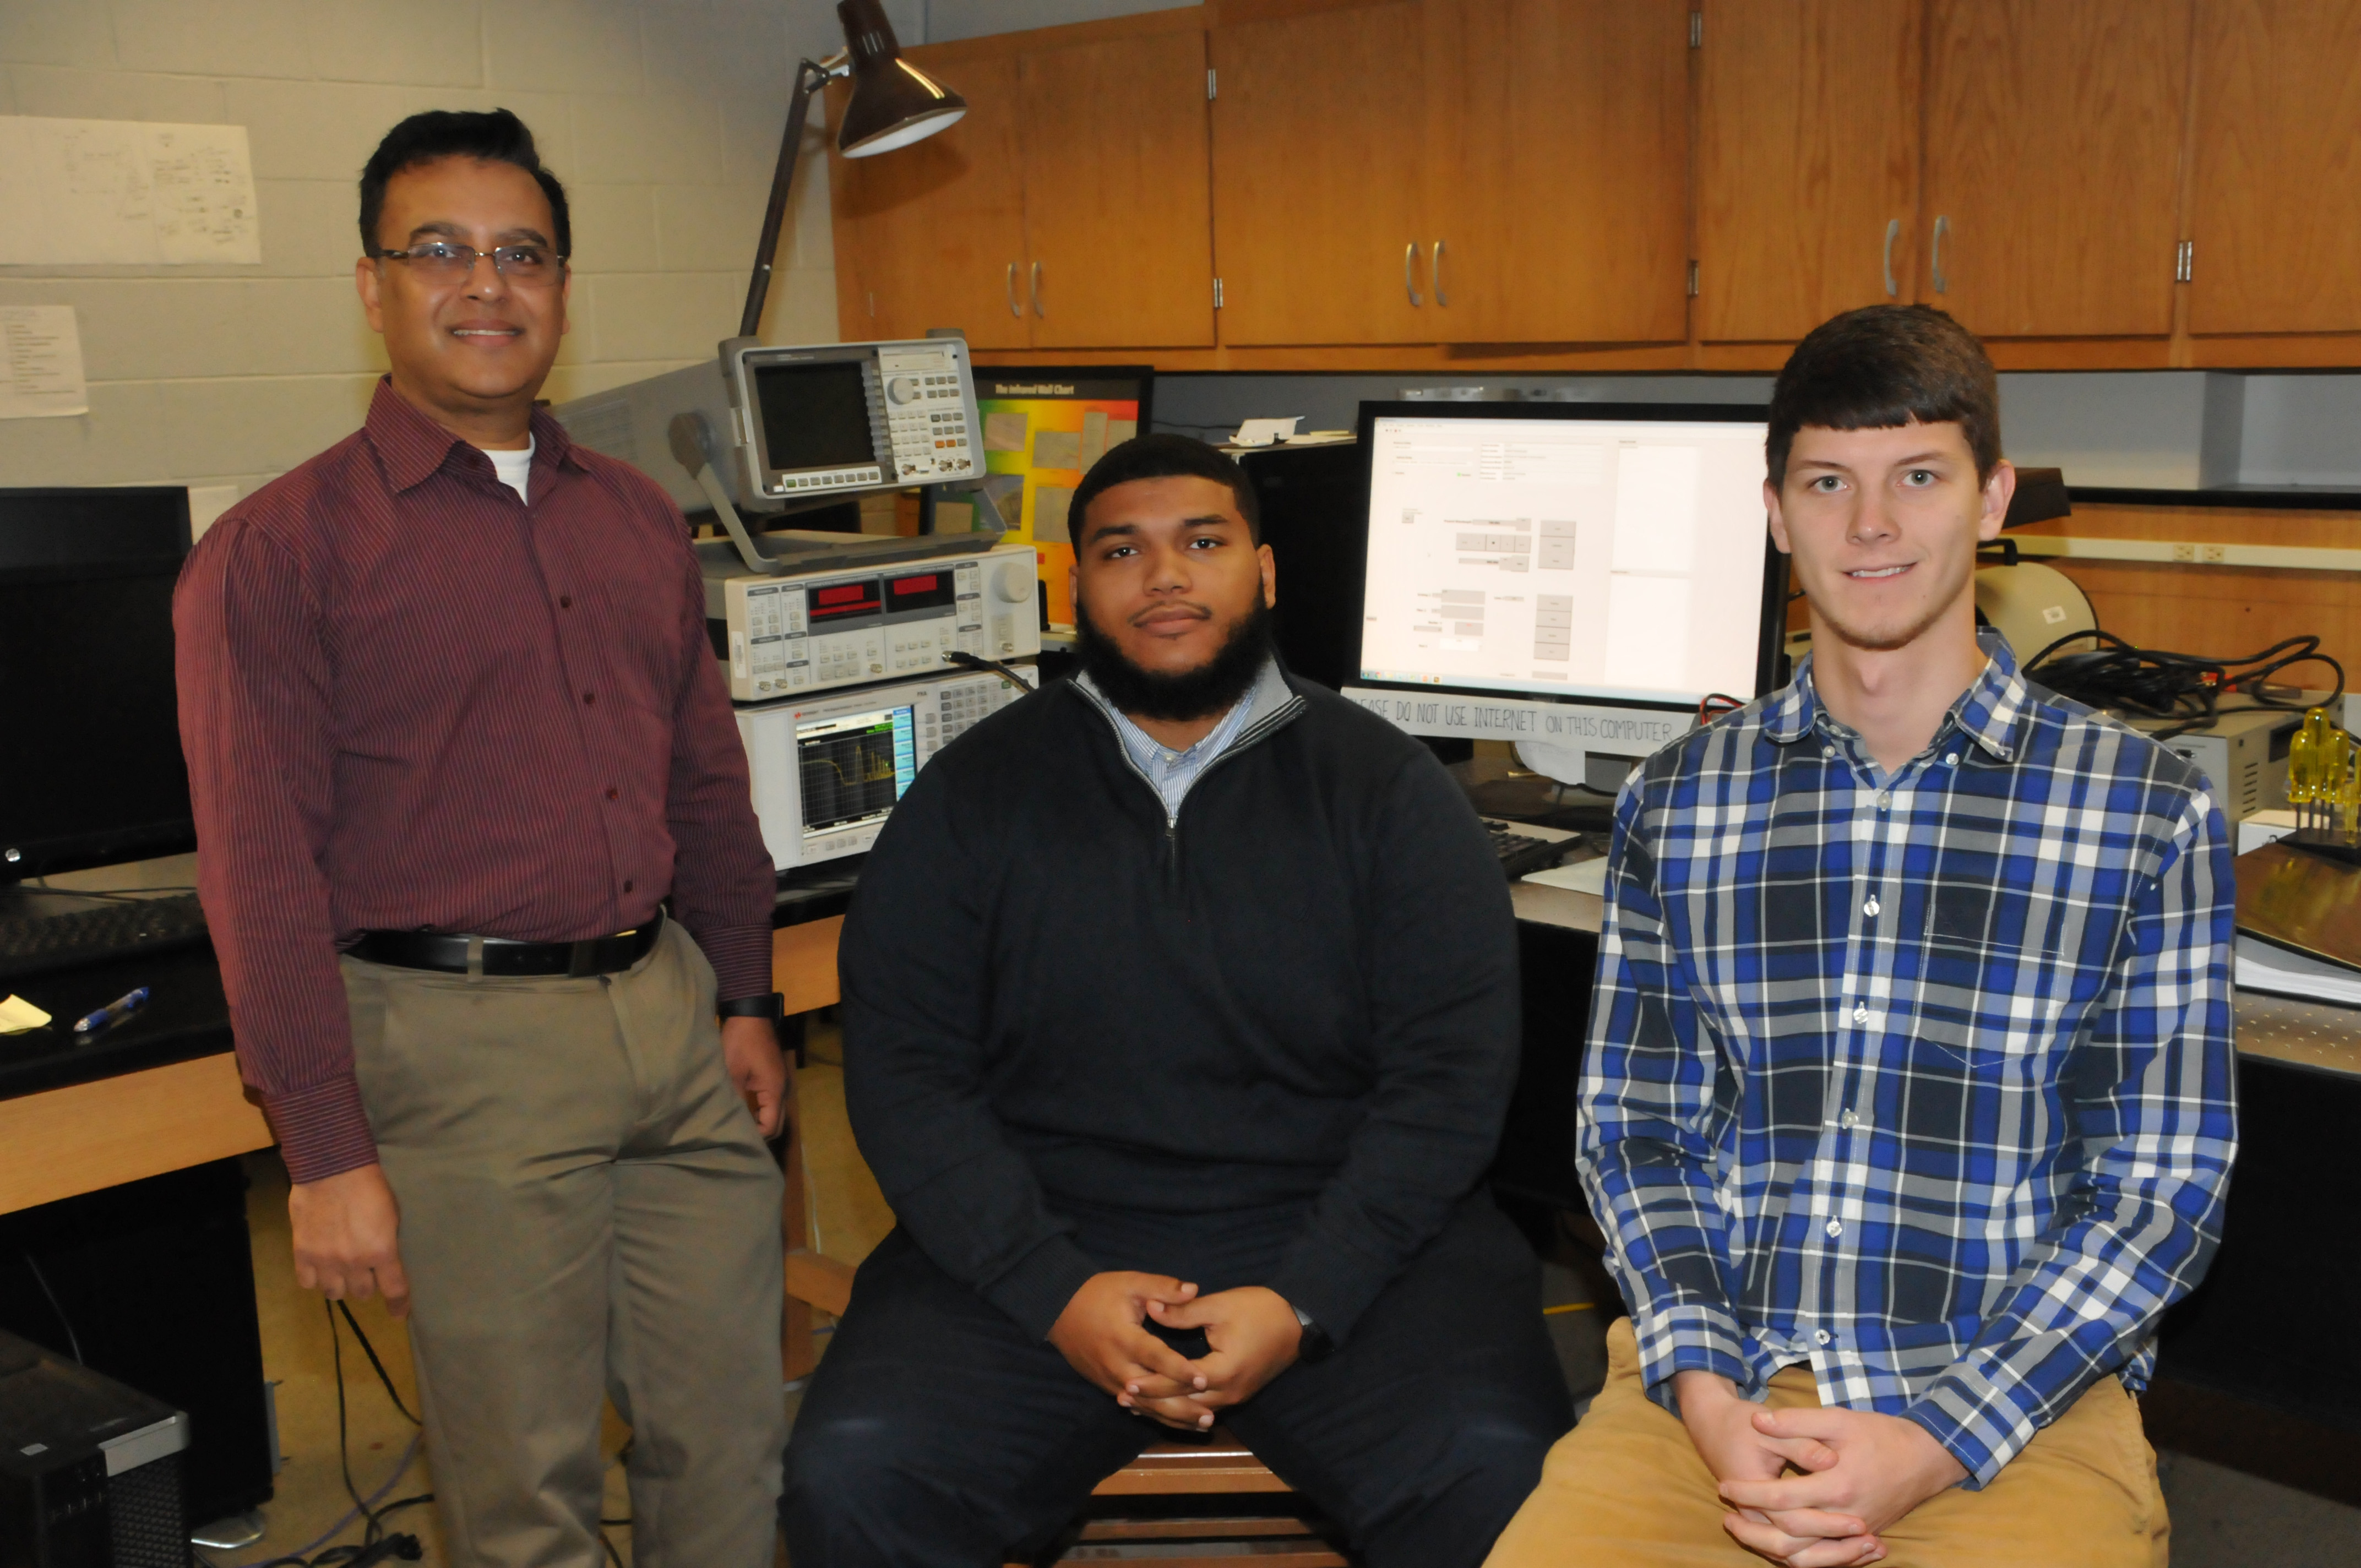 (L-r) Dr. Mukti Rana, chair of the Dept. of Physics and Engineering and the grant's principal investigator, with Danzel Hill and Andrew Voshell, undergraduate and graduate students, respectively. Both students are working with Dr. Rana on the research project.